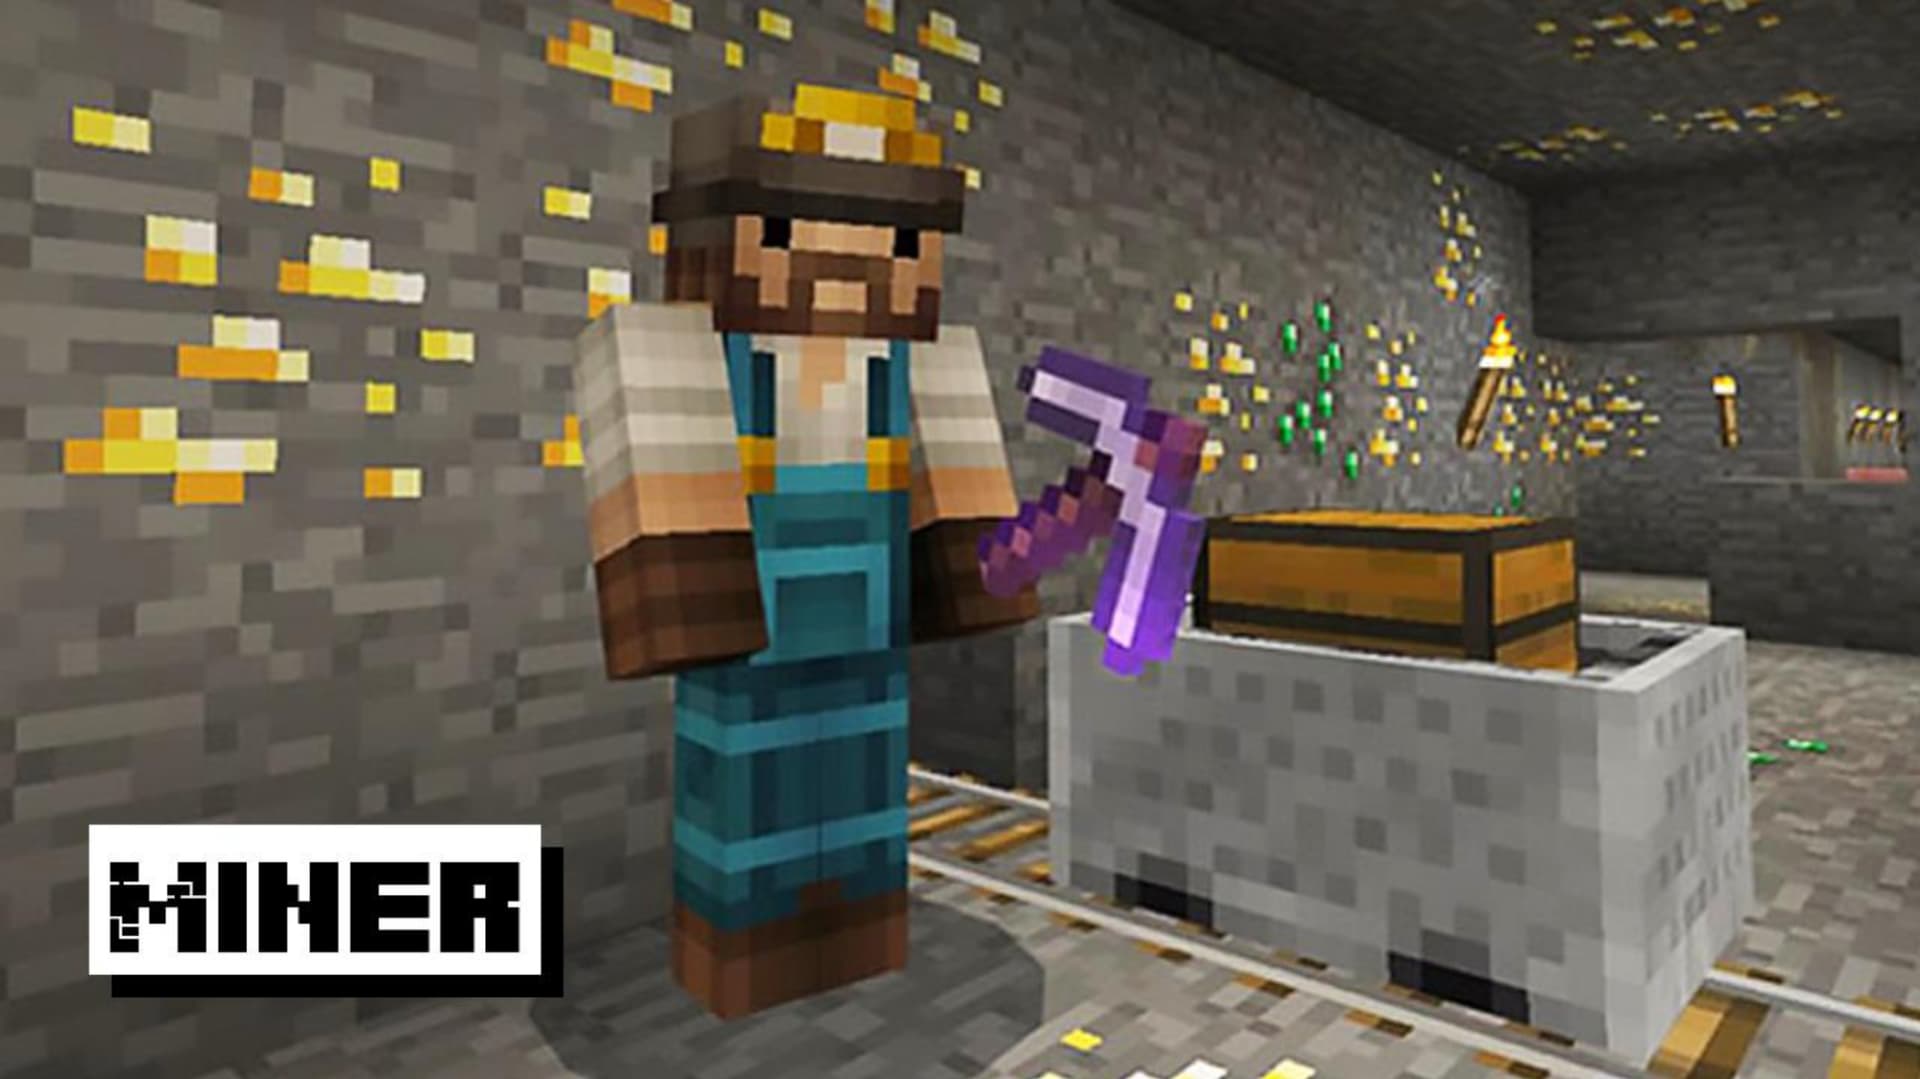 Download Minecraft 1.20, 1.20.0.50 and 1.20.0 apk FREE: Full Version